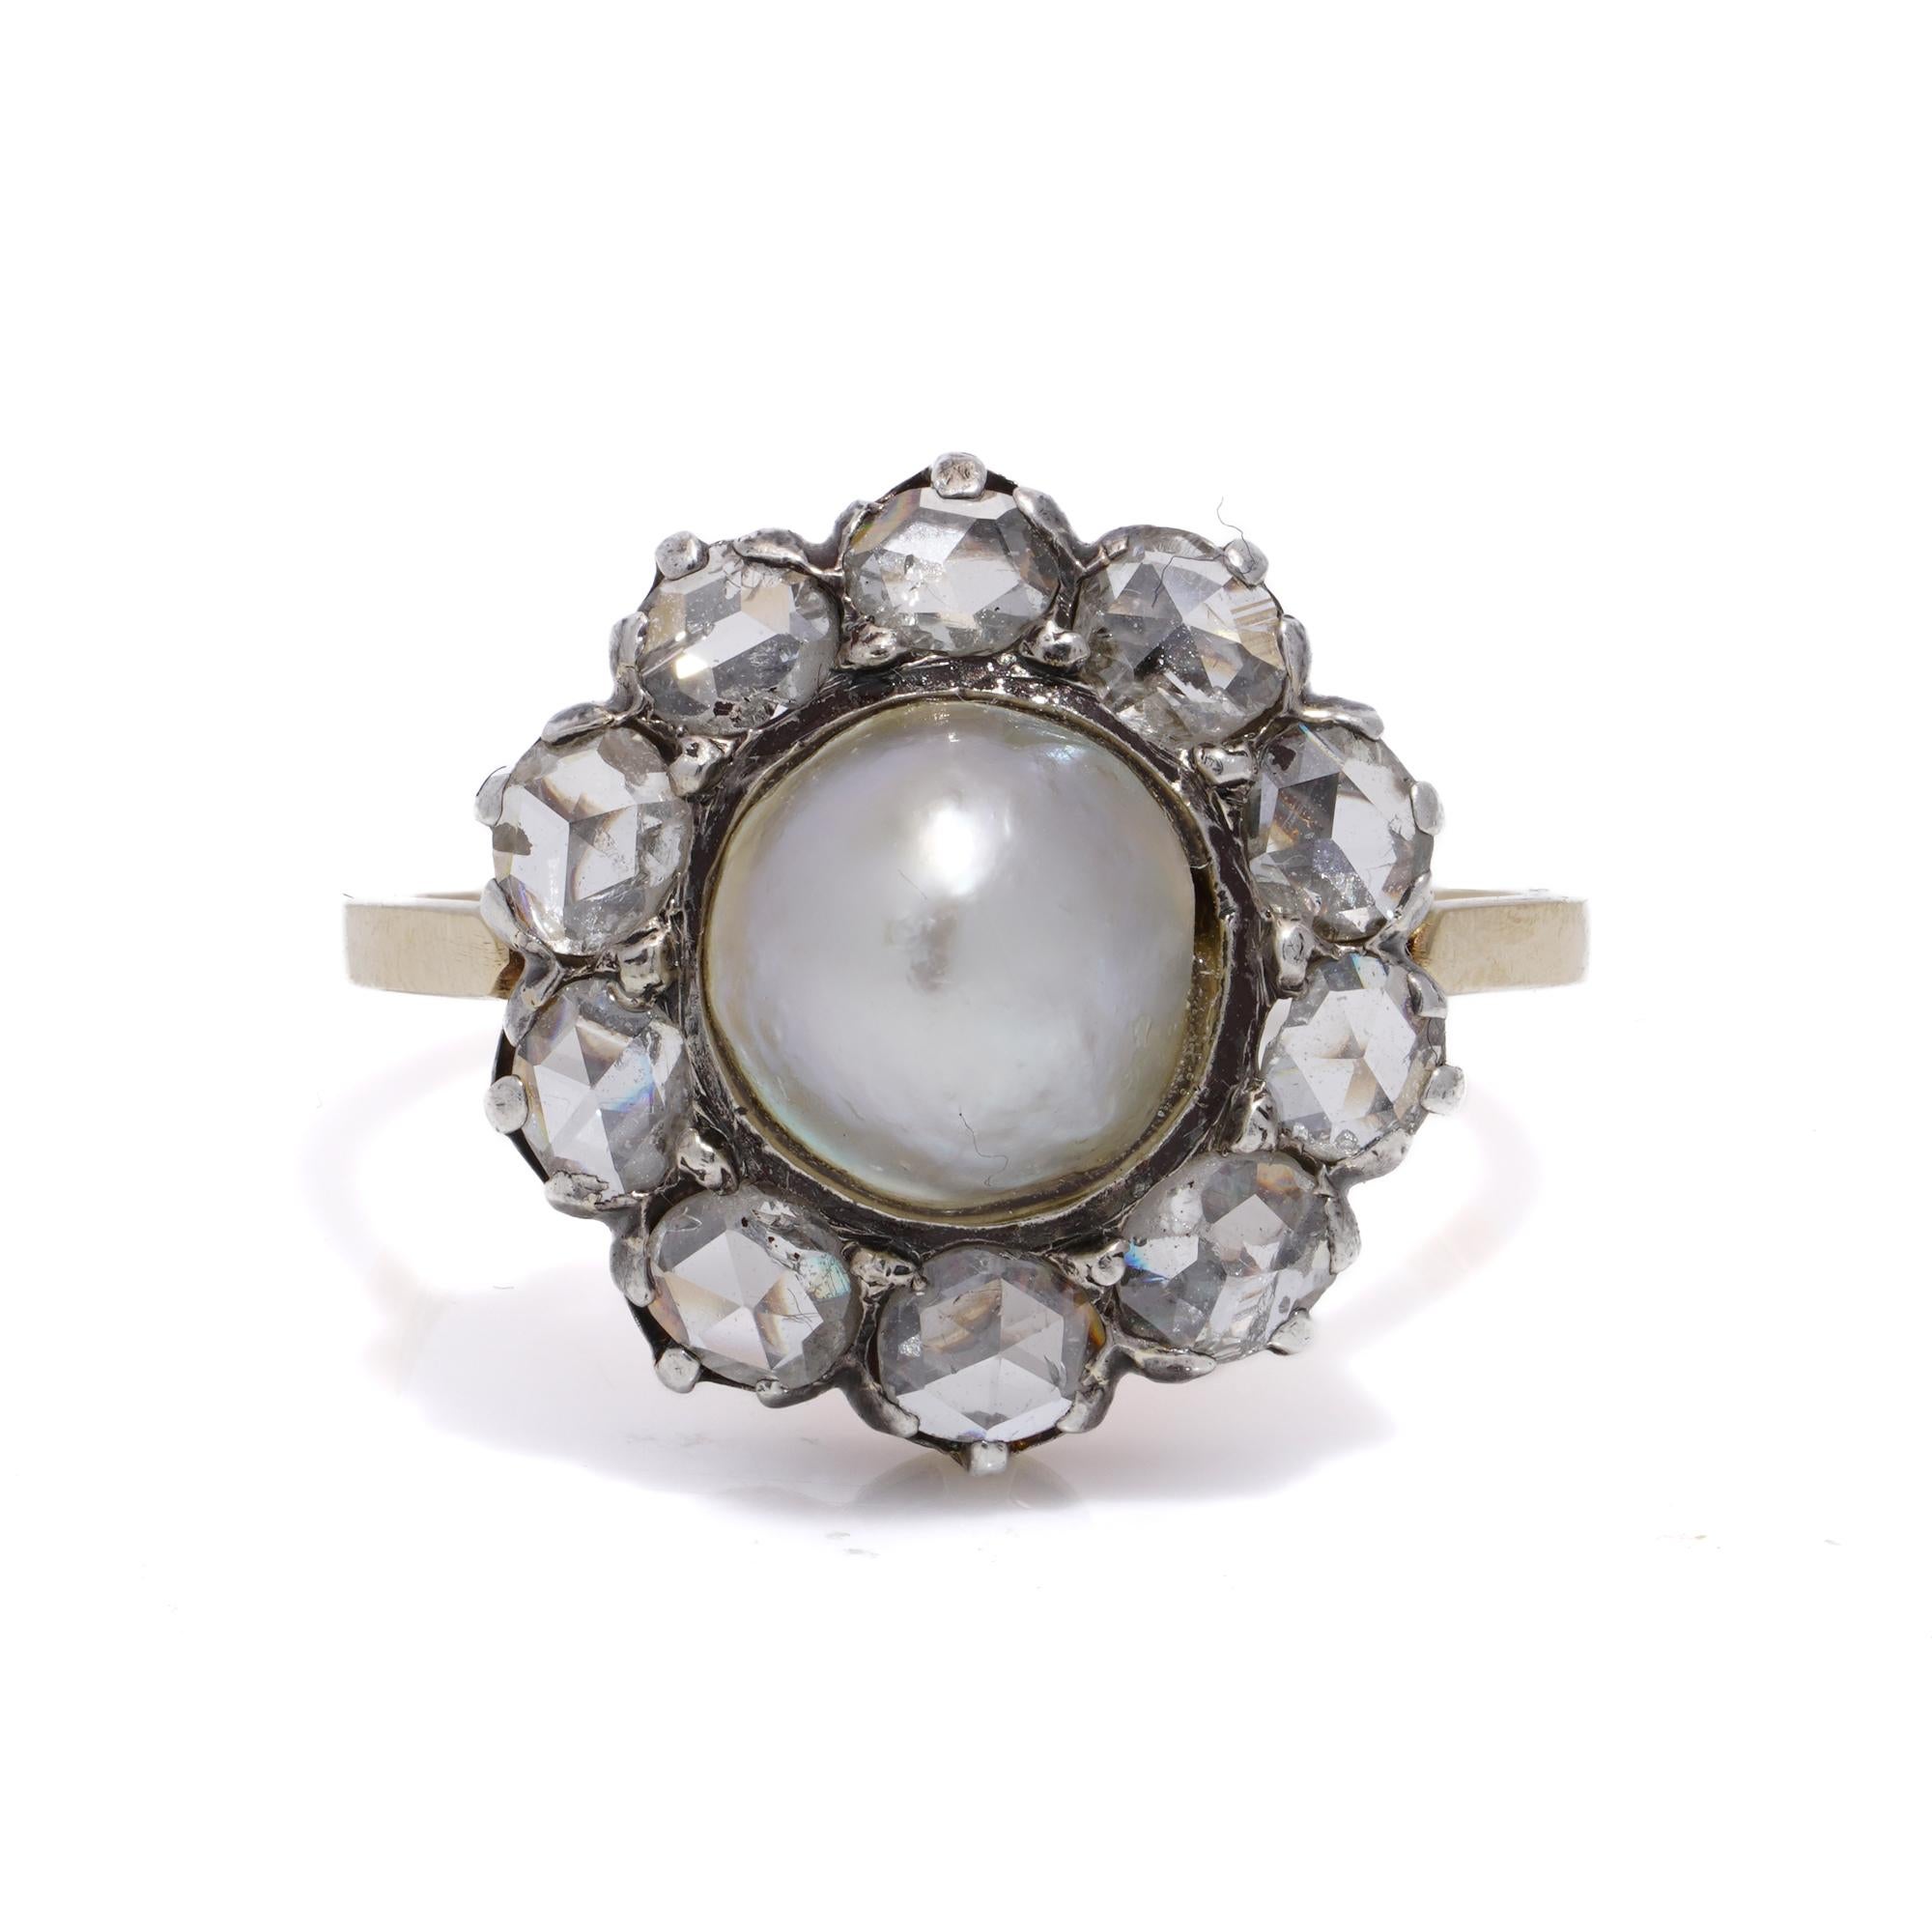 Antique Victorian 18kt yellow gold and silver flower head pearl and diamond cluster ring. 
Made in England, circa 1890s 
X-ray tested positive for 18kt gold and silver. 
Please note: Shank has been added later. 

Dimensions - 
Finger Size (UK) = M (